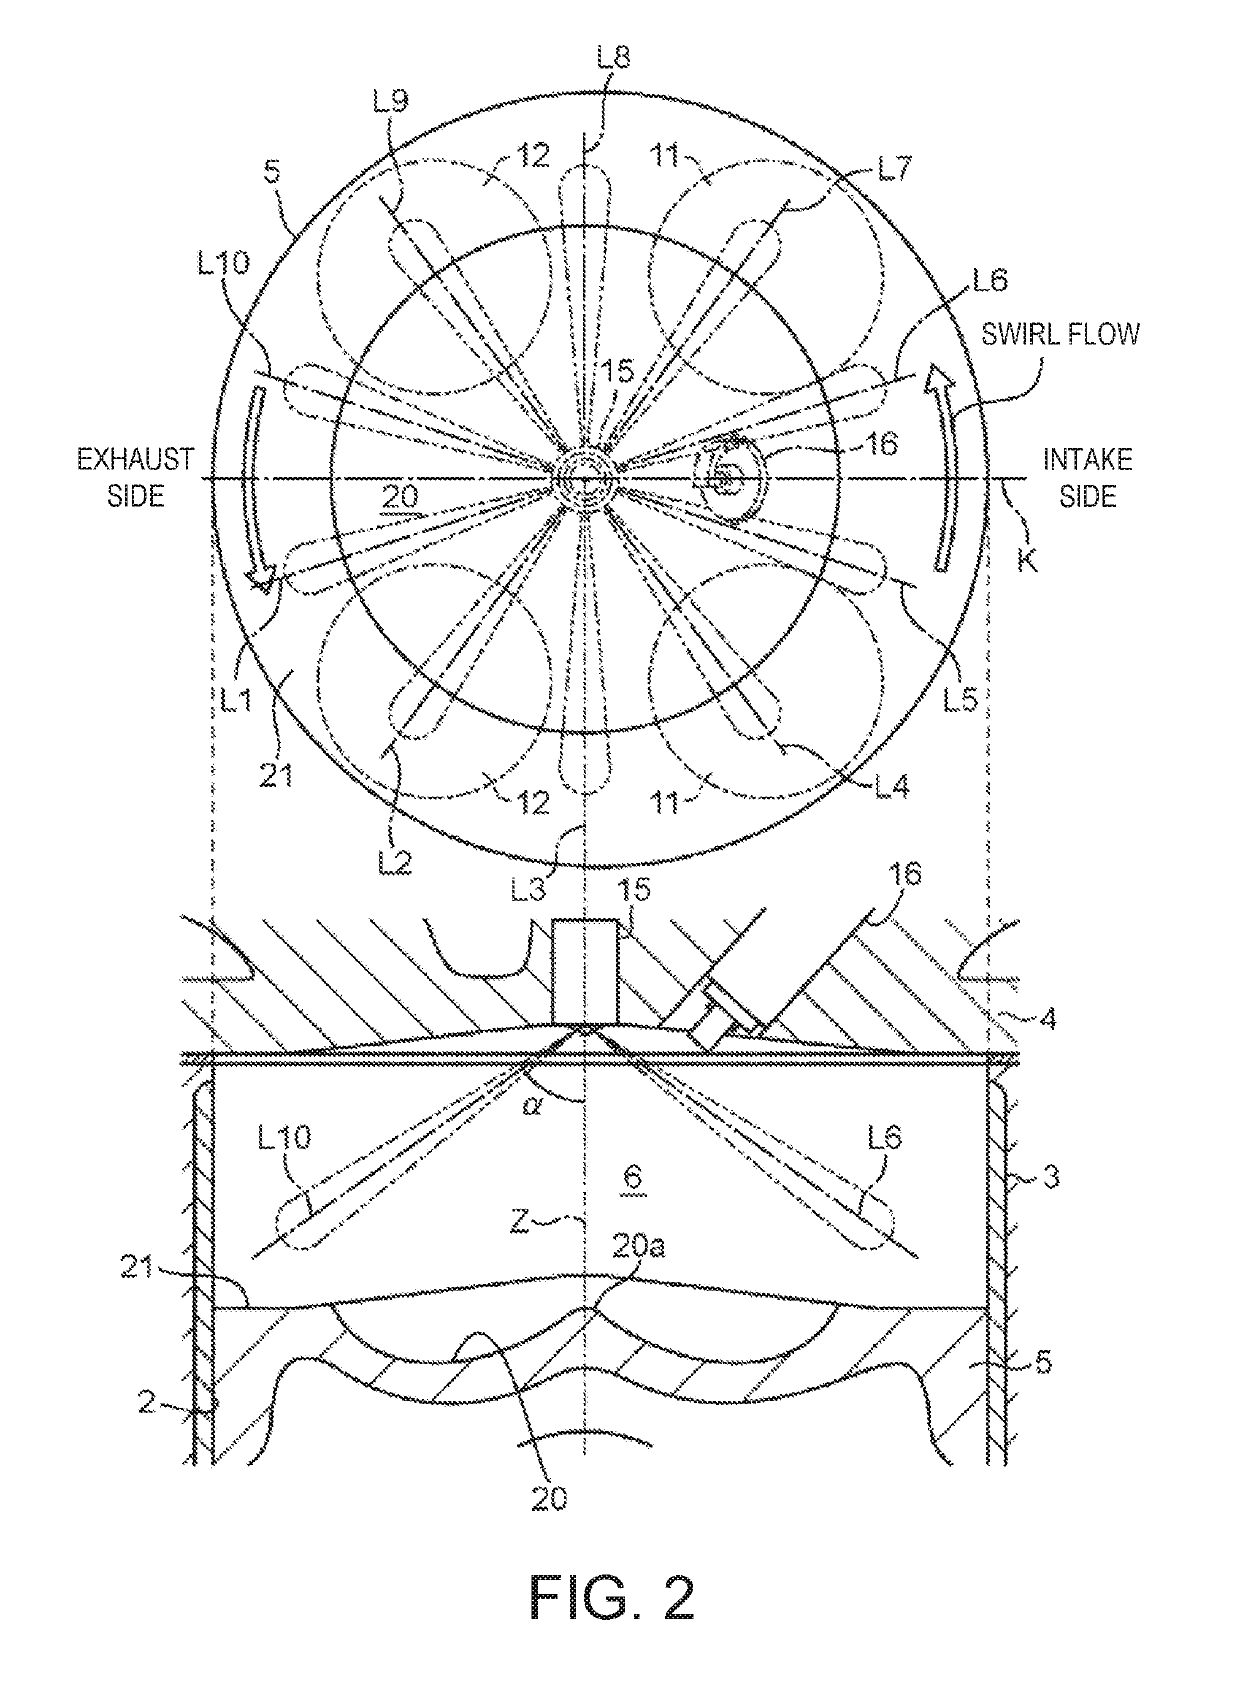 Control system for compression-ignition engine